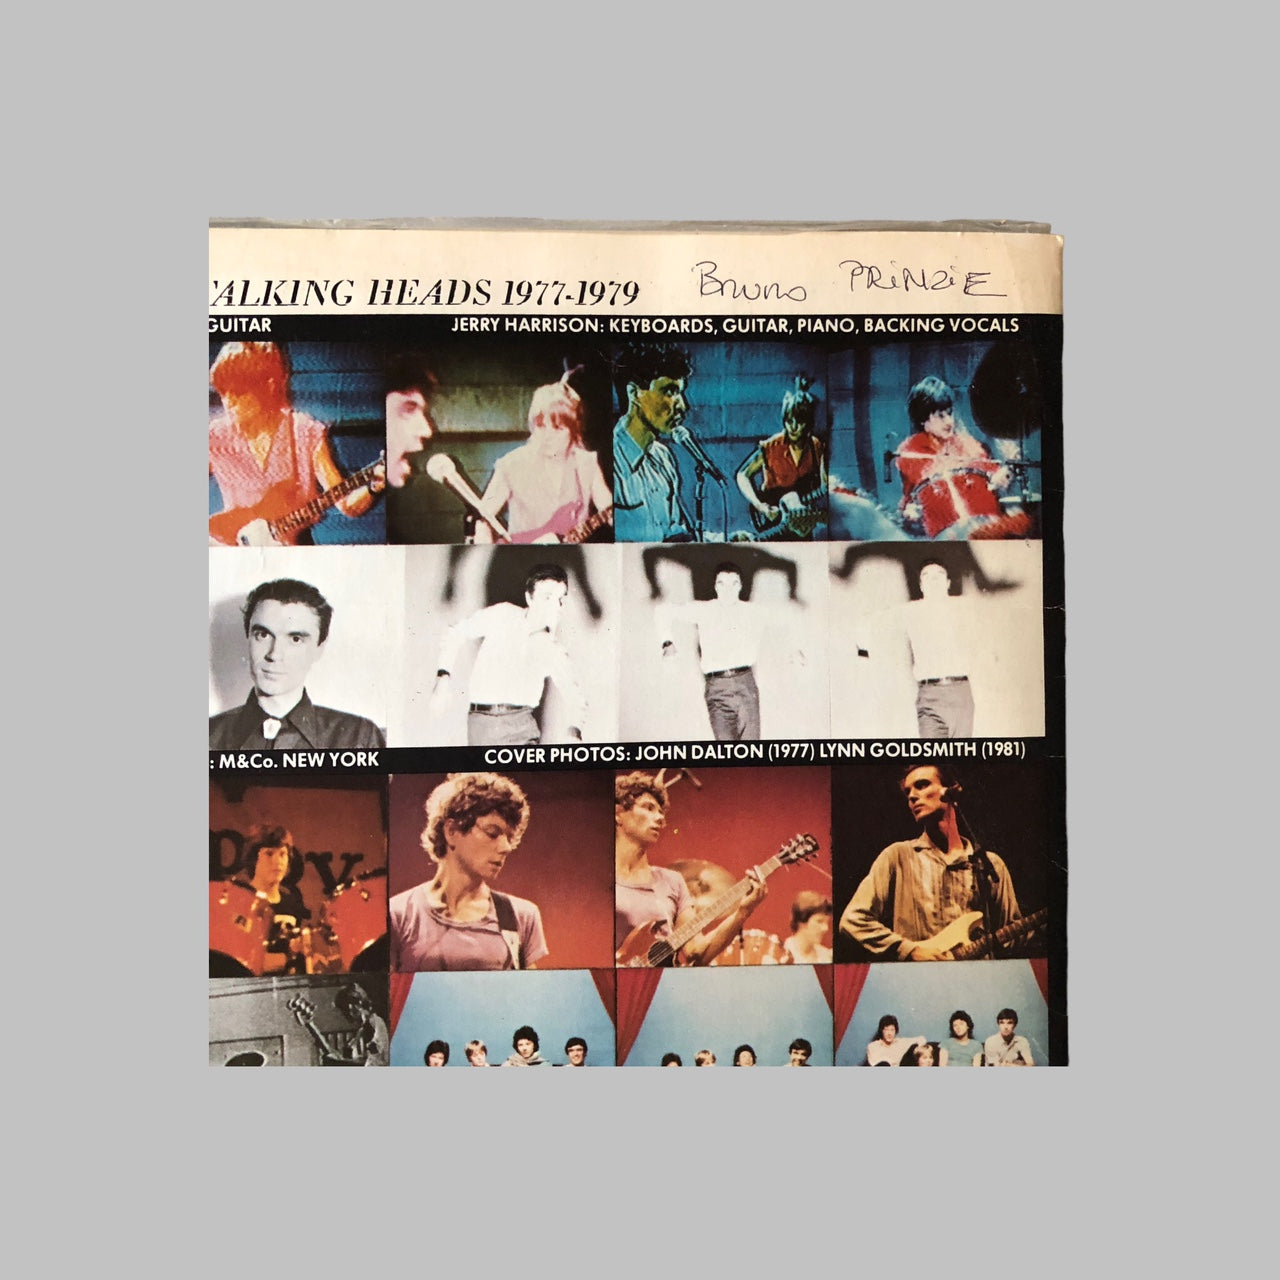 LP Vinyl - Talking Heads - The Name of this Band is Talking Heads.